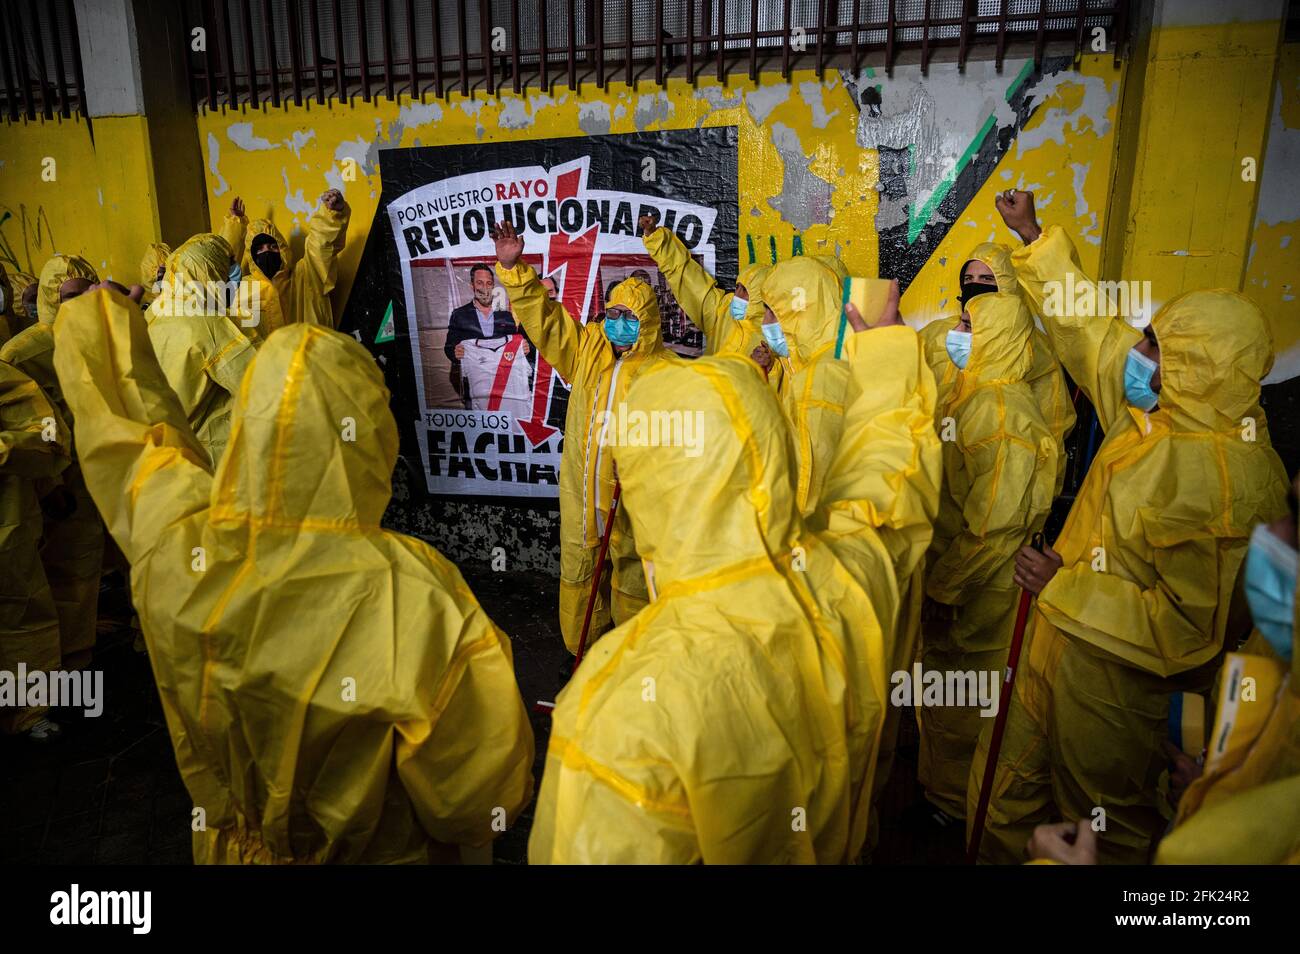 Madrid, Spain. 27th Apr, 2021. Protesters wearing personal protective equipment raising hands after placing a placard to protest against the last visit to a match in the Rayo Vallecano Stadium of Santiago Abascal, leader of far right wing VOX party, and Rocio Monasterio, candidate for the next regional elections of Madrid. Protesters, members of Bukaneros group, are performing an action under the slogan 'let's disinfect our stadium' shouting slogans against fascism and against far right wing VOX party. Credit: Marcos del Mazo/Alamy Live News Stock Photo